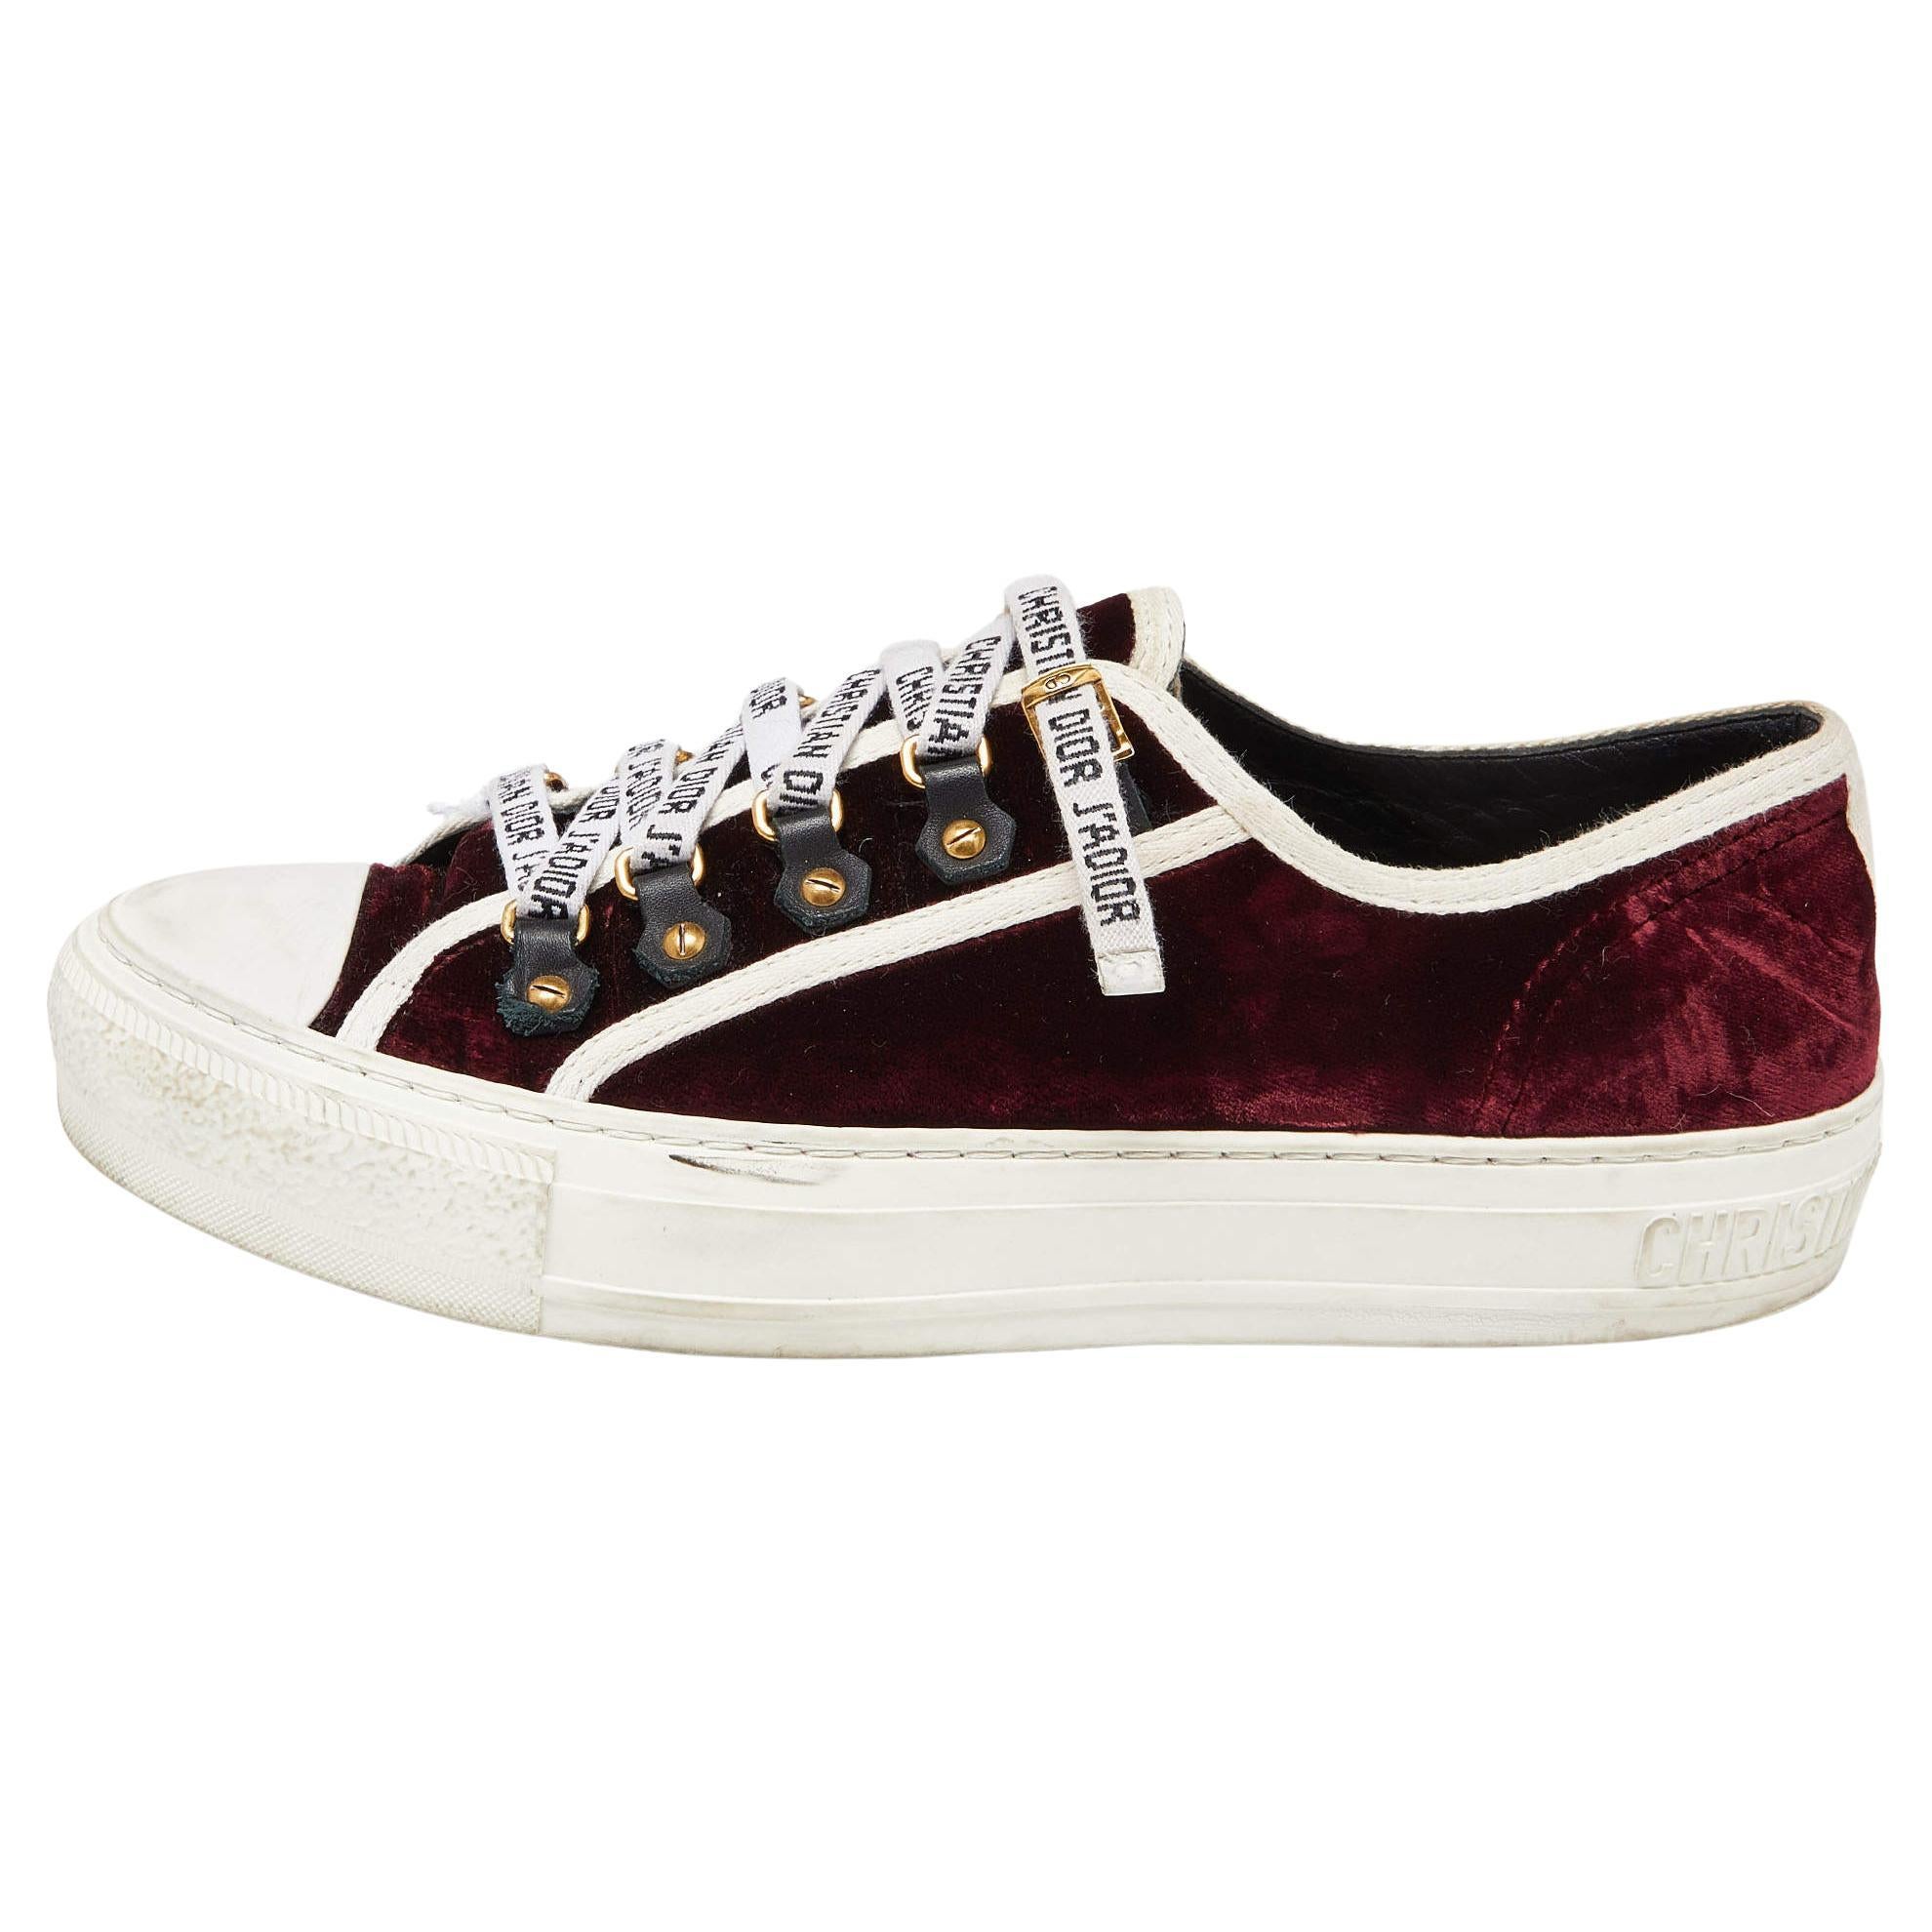 Dior Burgundy/White Velvet and Rubber Walk'n'Dior Sneakers Size 38.5